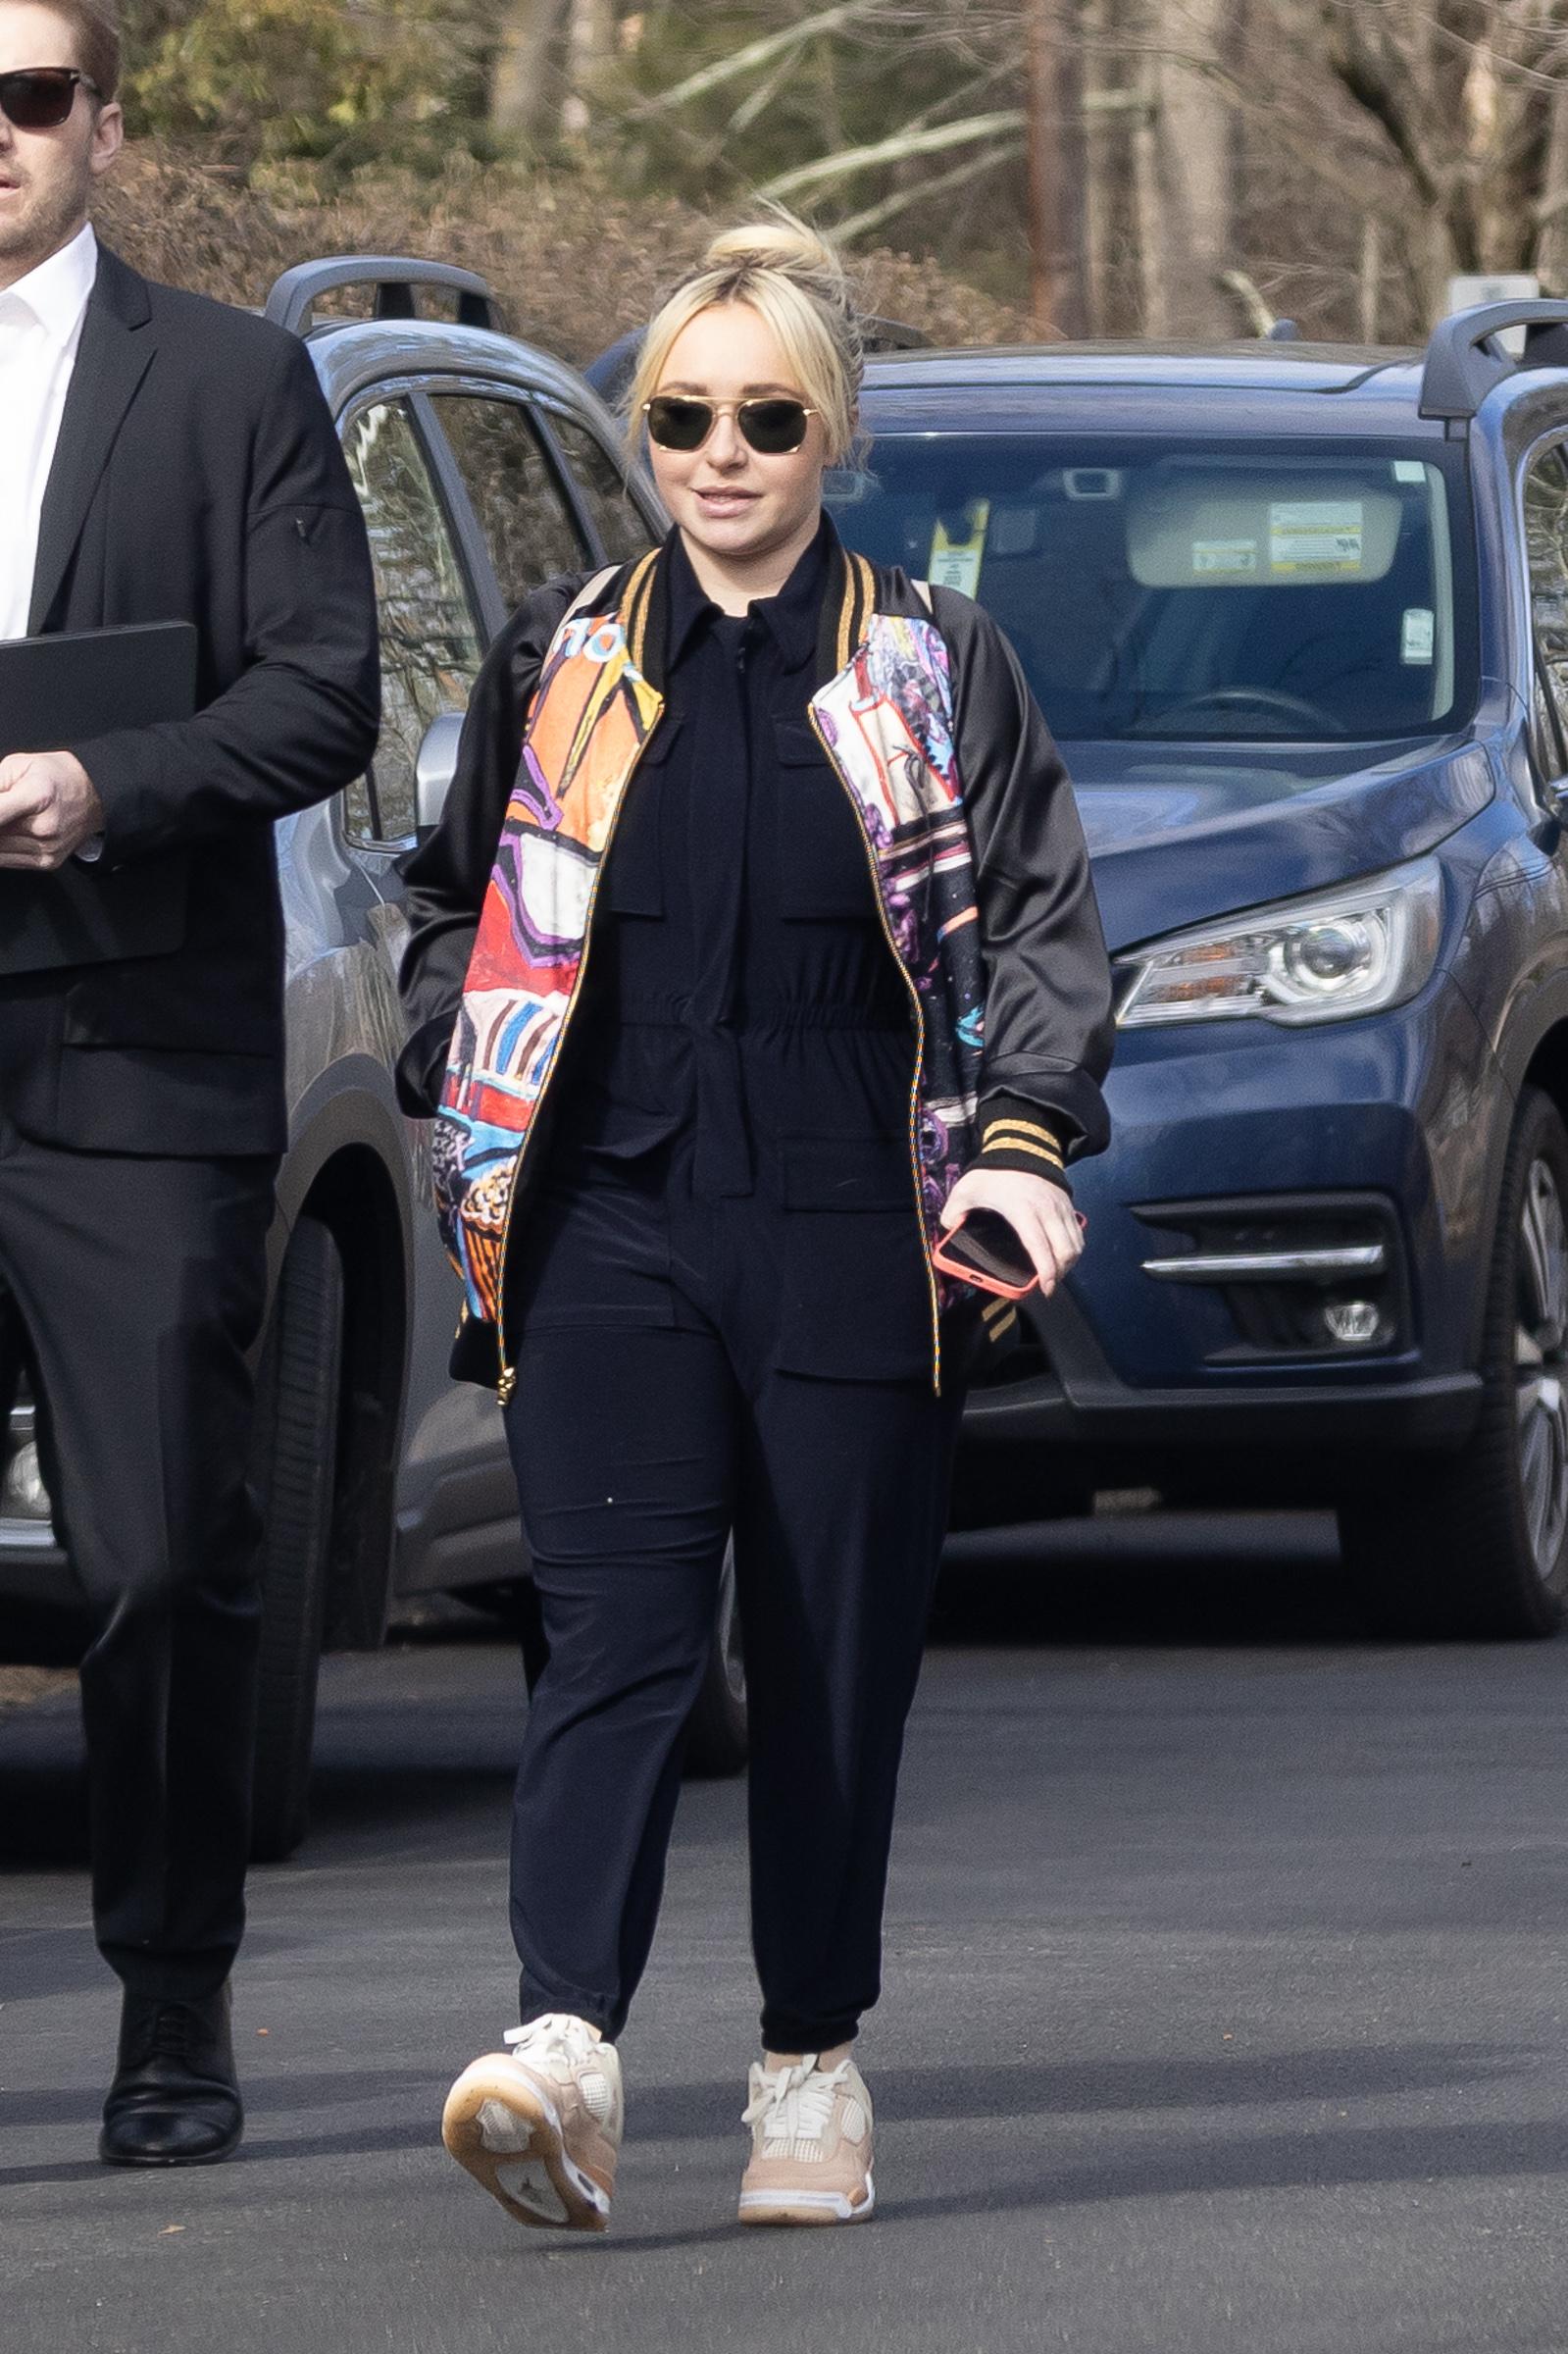 Hayden Panettiere arrives at her younger brother Jansen's celebration of life event in their hometown of Palisades, New York, with on/off boyfriend Brian Hickerson.